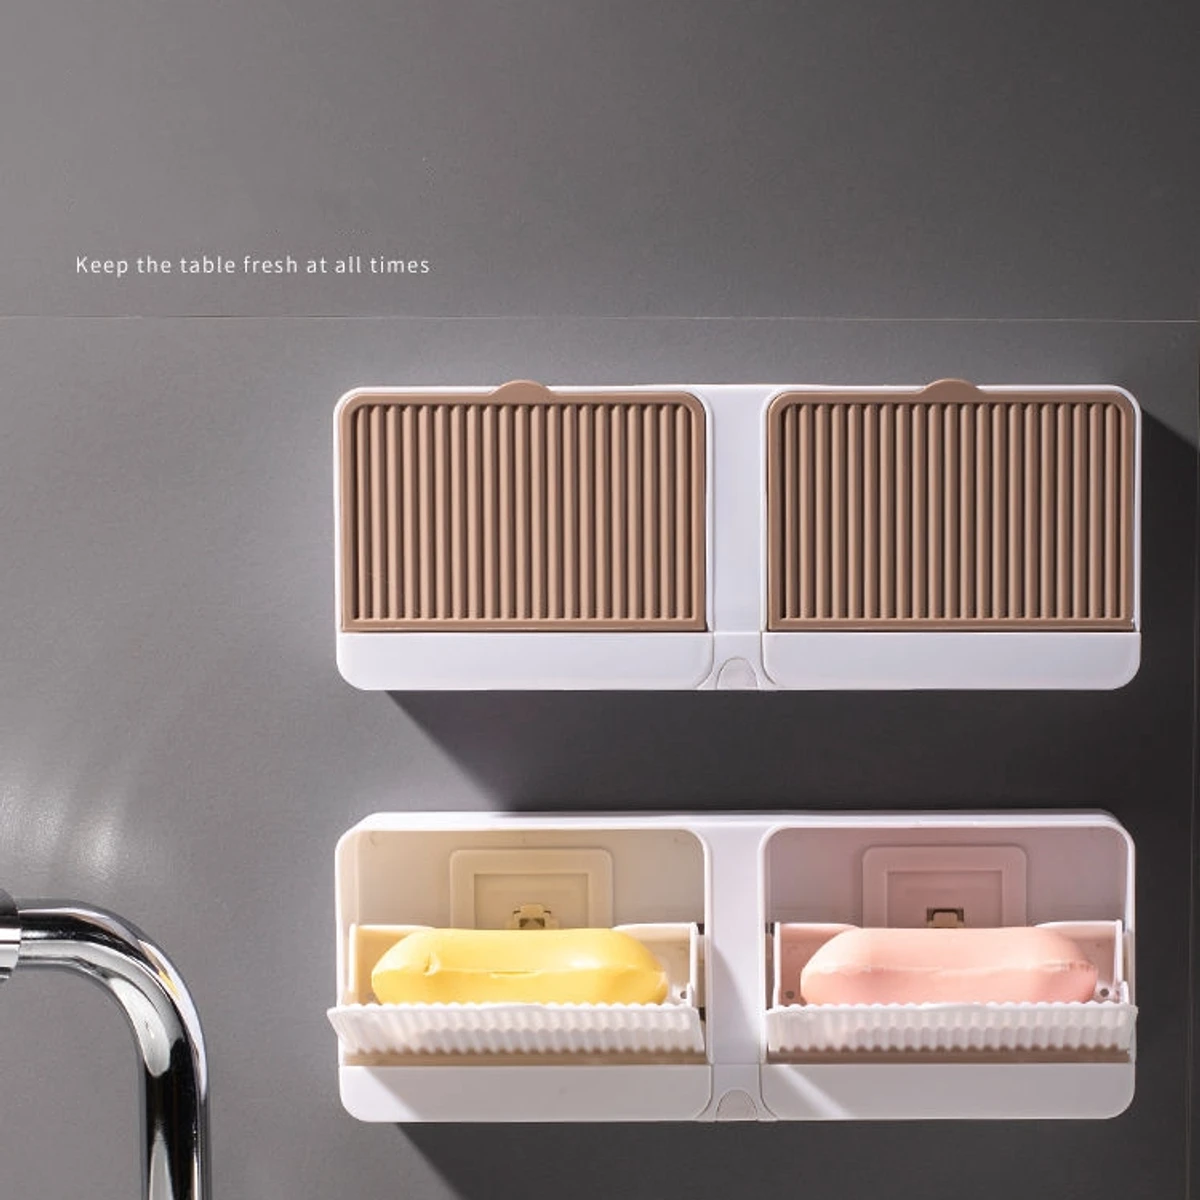 Creative Double Wall Hanging Soap Box With Lid Double Grids Draining Rack Soap Sponge Holder Organizer Bathroom Accessories